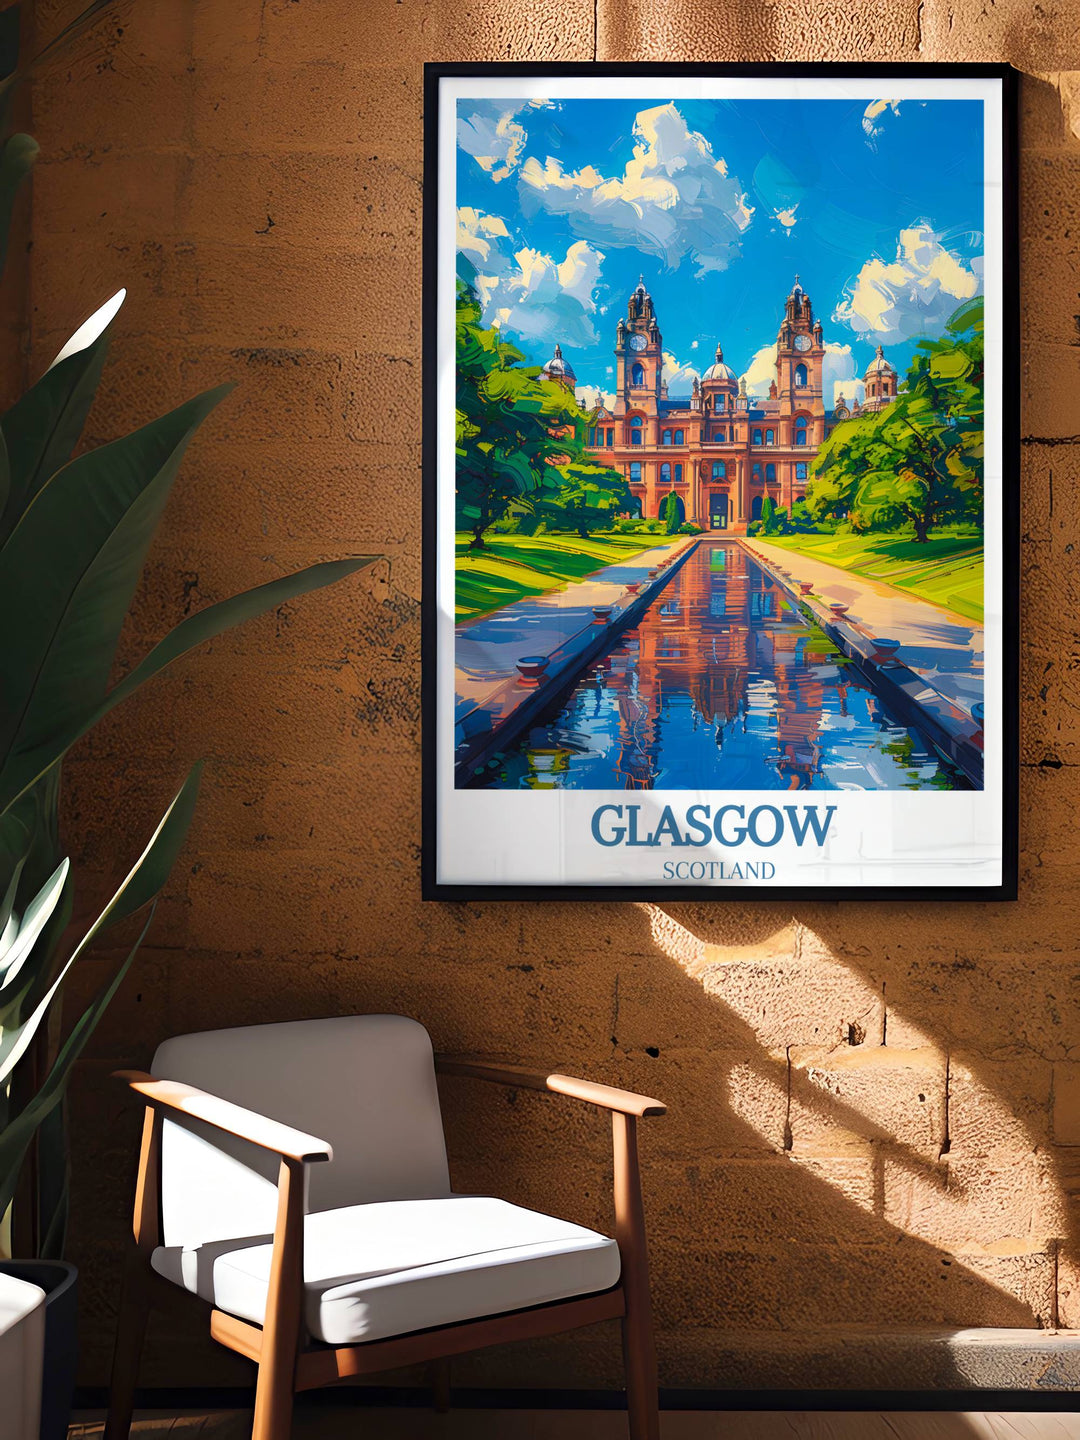 This Glasgow wall hanging illustrates the citys enchanting appeal through detailed artwork, designed for art aficionados looking to gift or own a piece of Scotlands rich heritage and beauty, making it a cherished addition to any collection of travel-inspired decor.